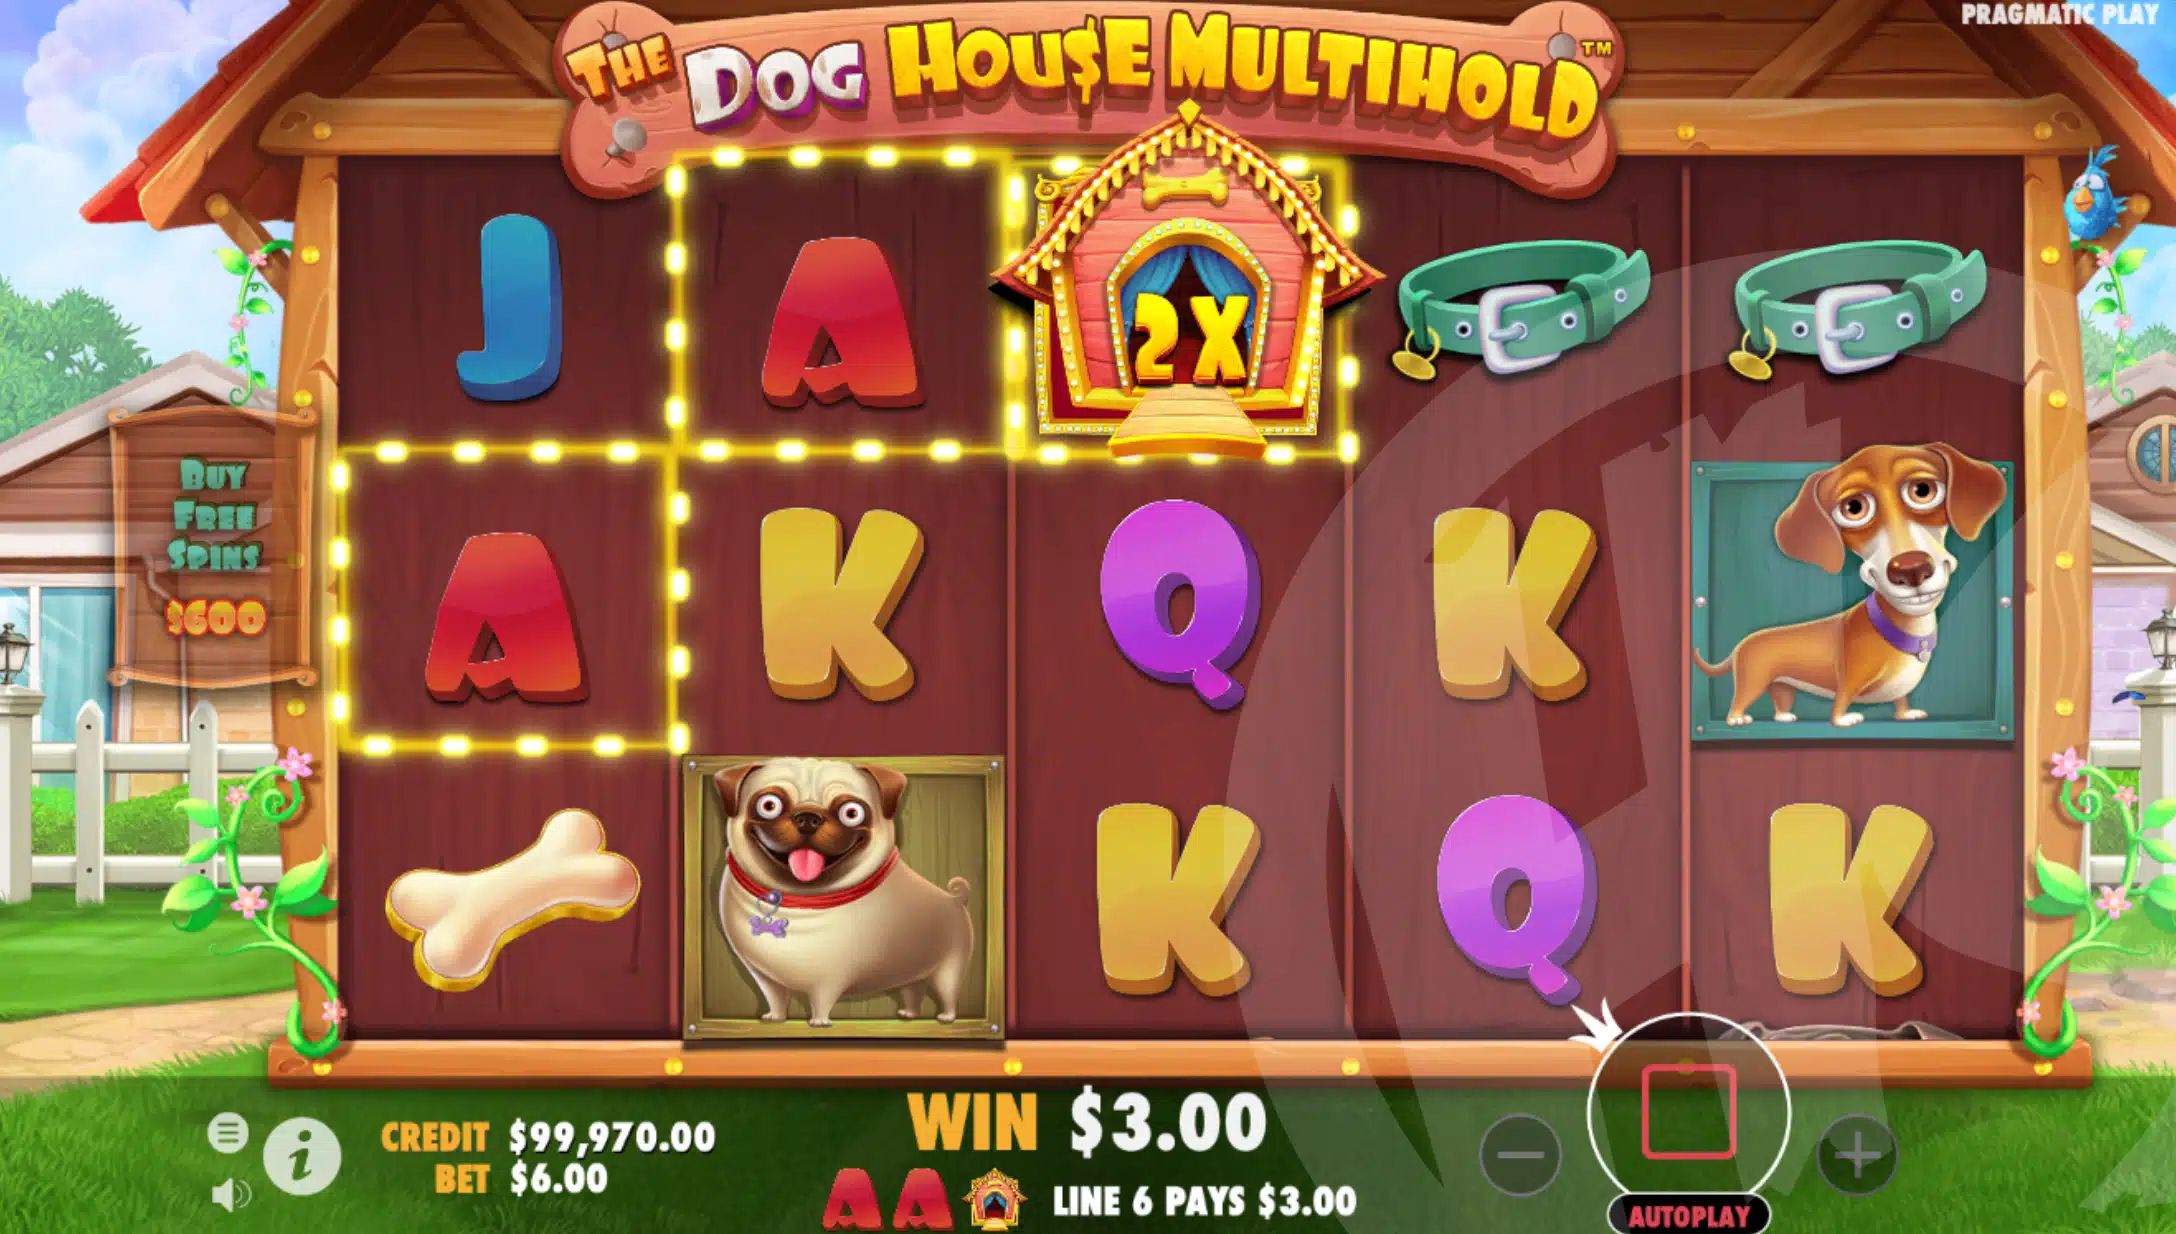 The Dog House Multihold Offers Players 20 Fixed Win Lines